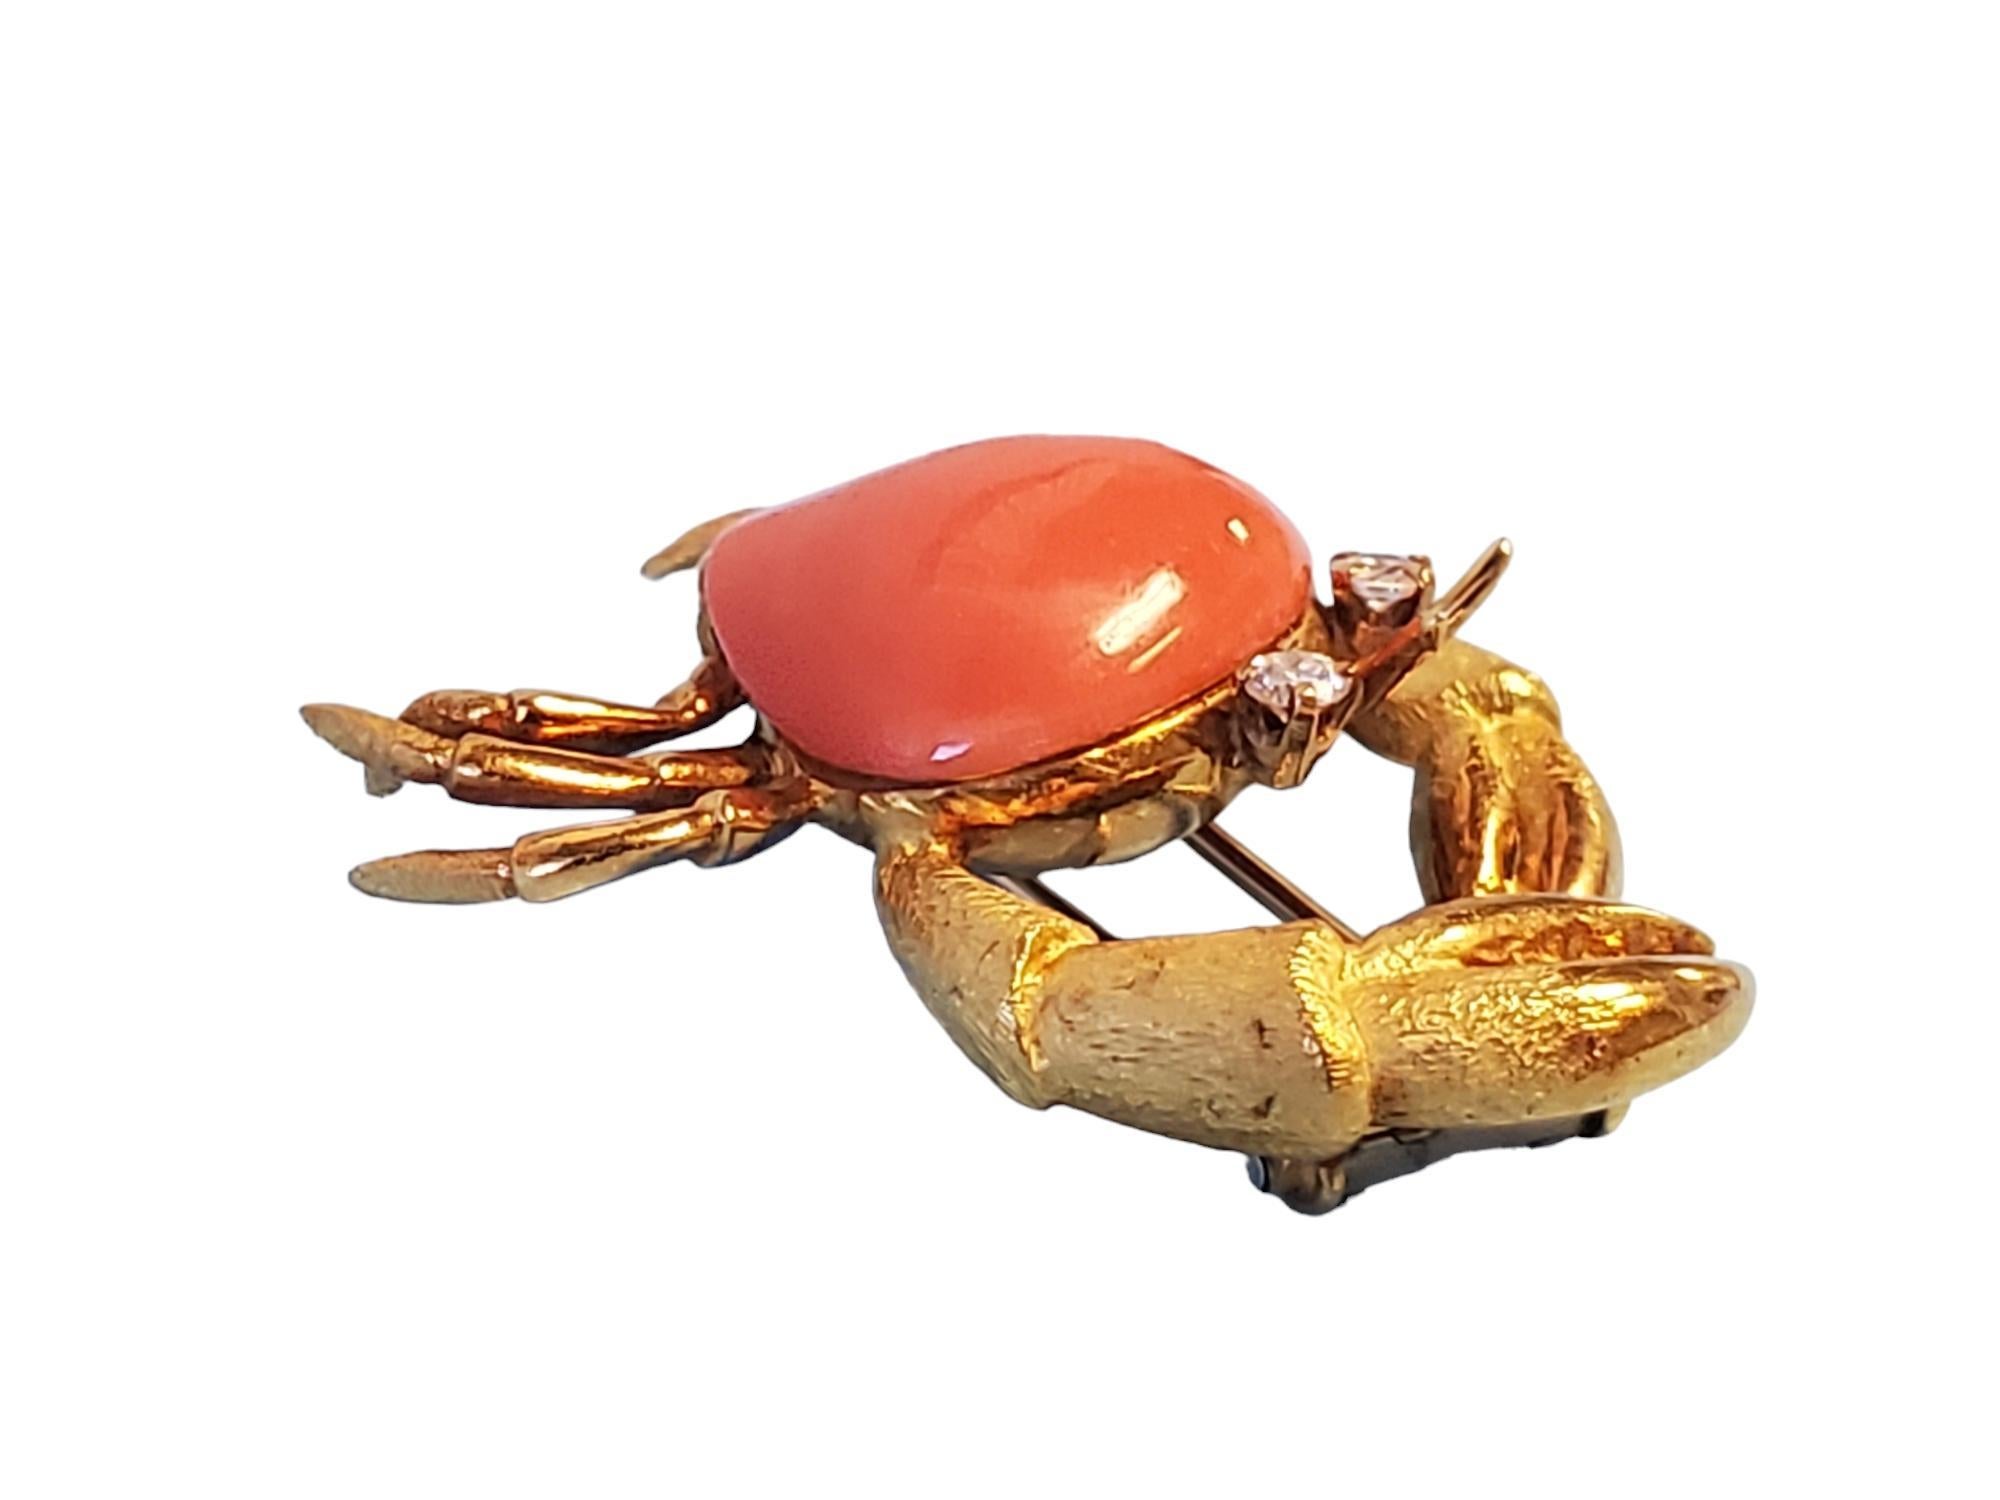 Listed is an estate vintage crab pin/brooch. It is beautifully made with angel skin coral and 2 white vs diamonds approximately .15tcw.  The pin was added in 14k white gold. the body is 18k yellow gold. This pin was created circa 1940-1950's. The